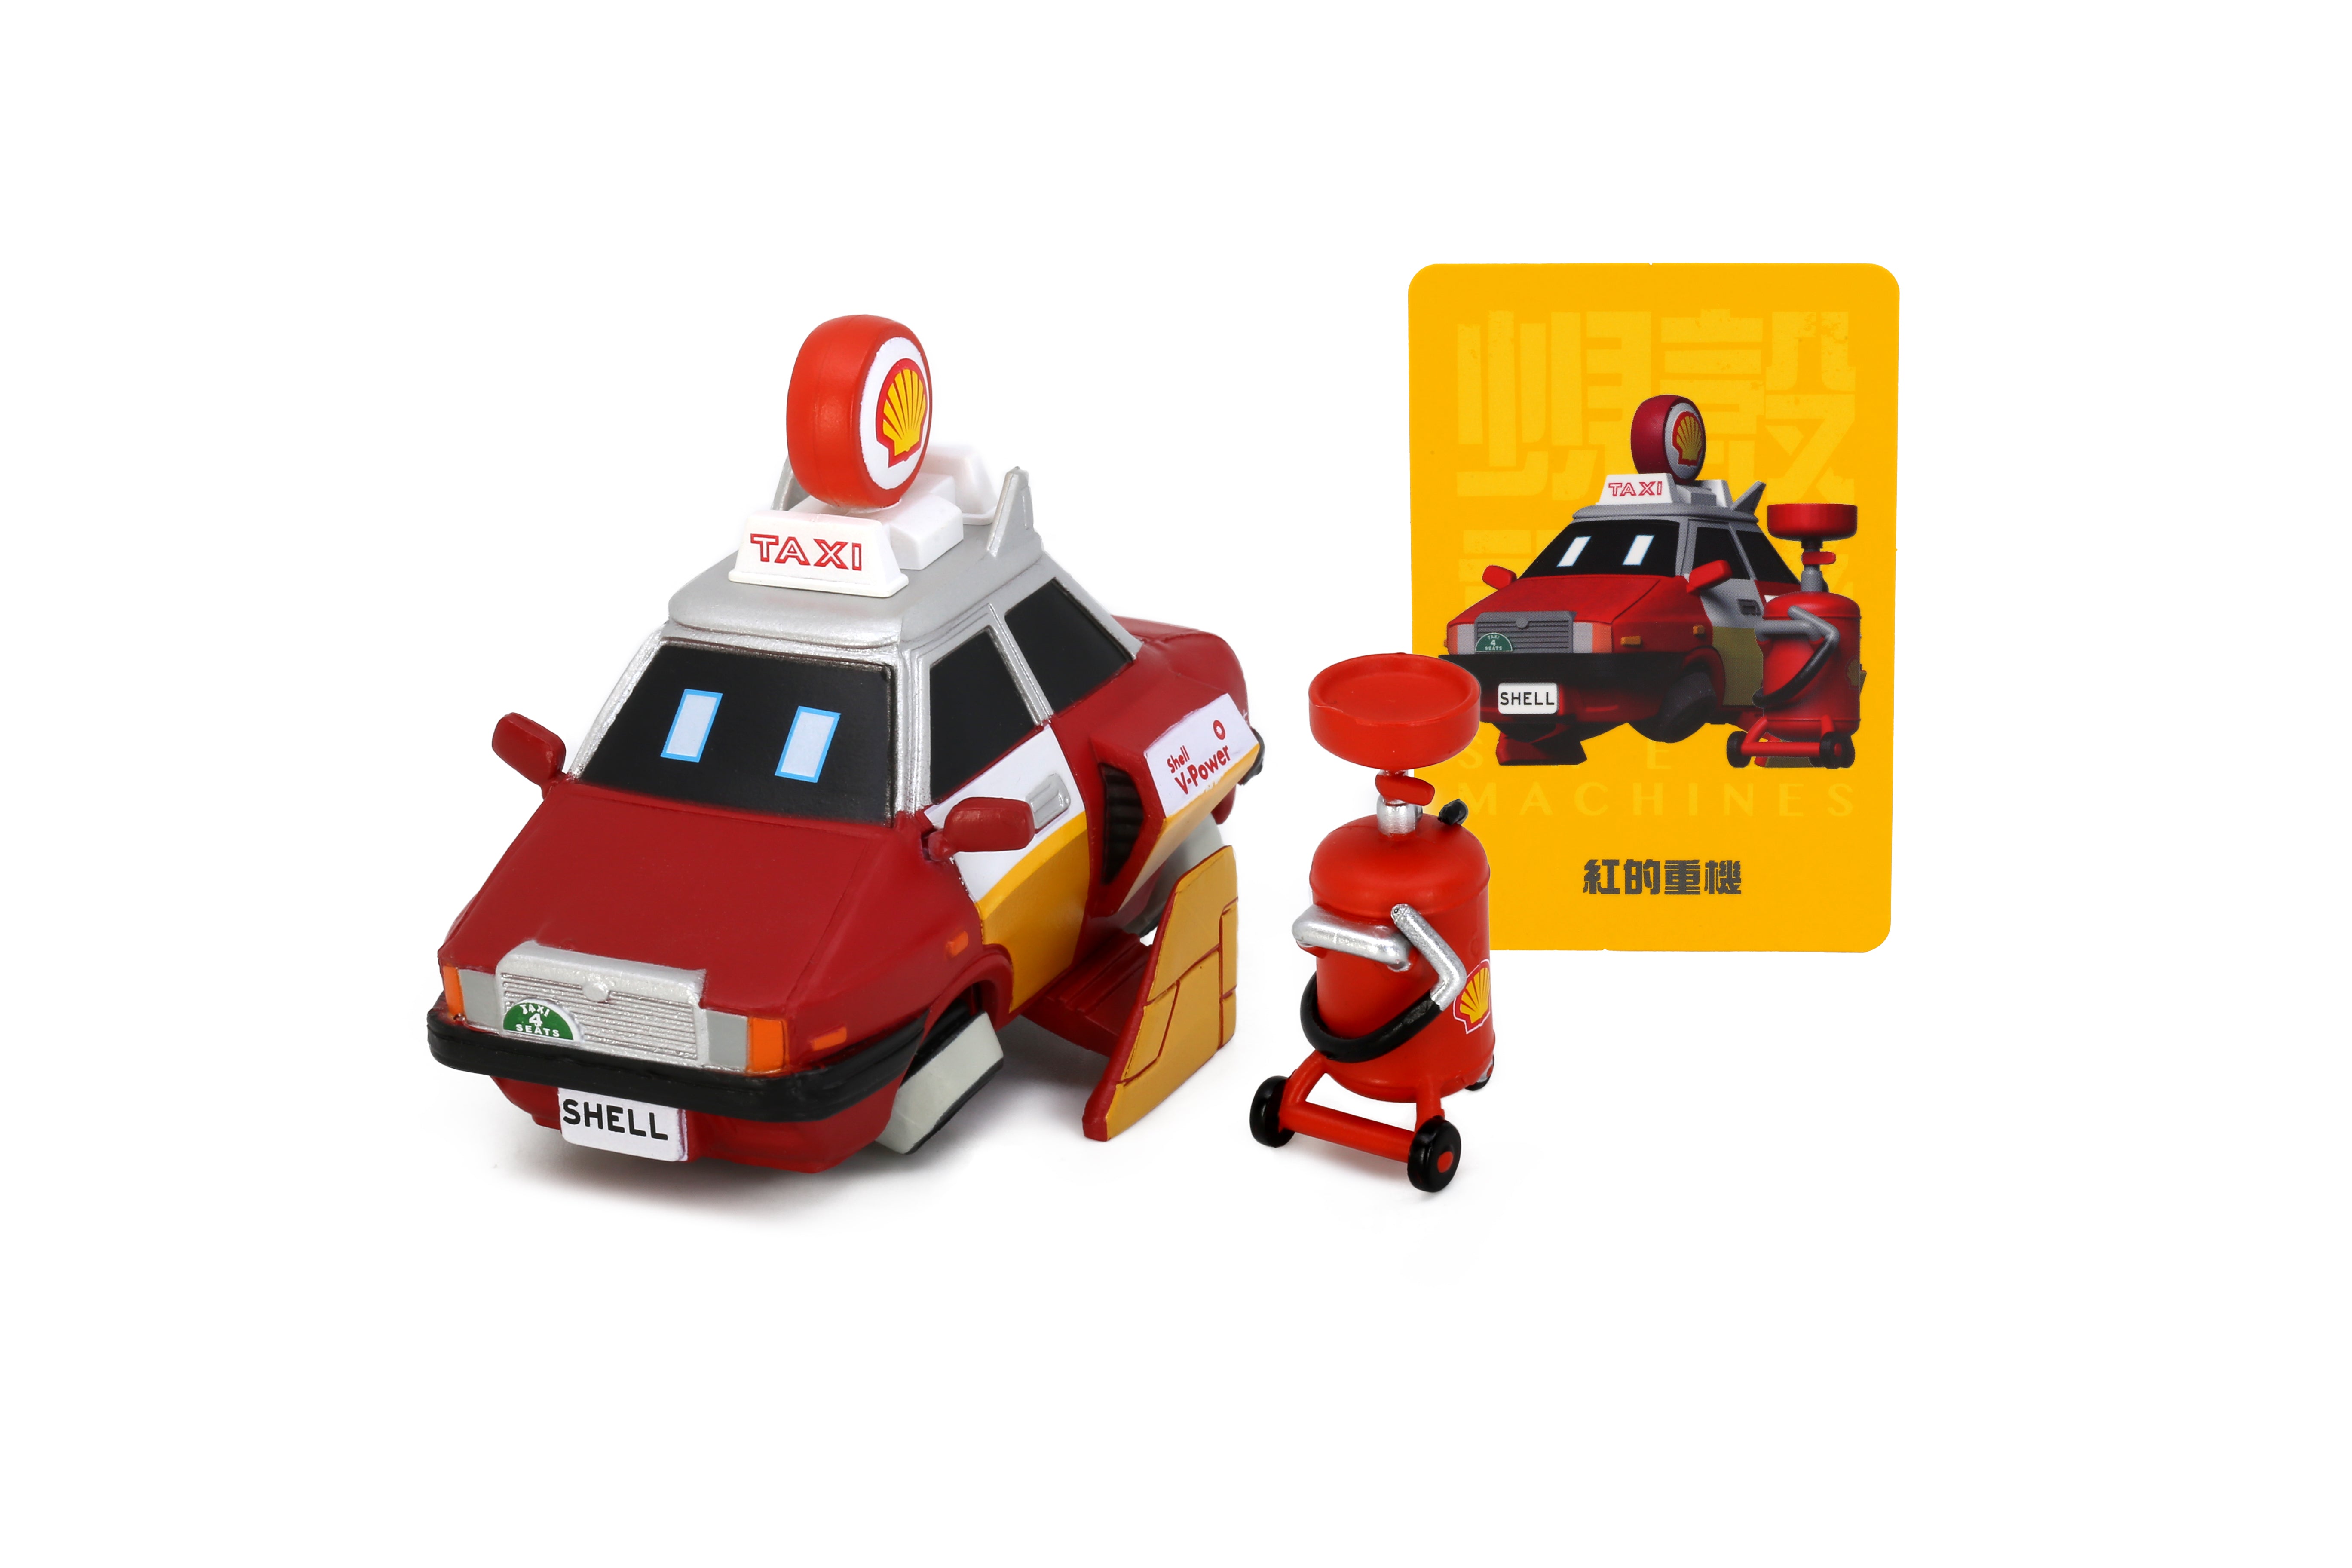 PRE-ORDER Tiny Style - Shell x HK Machines Series 1 [Box of 6]